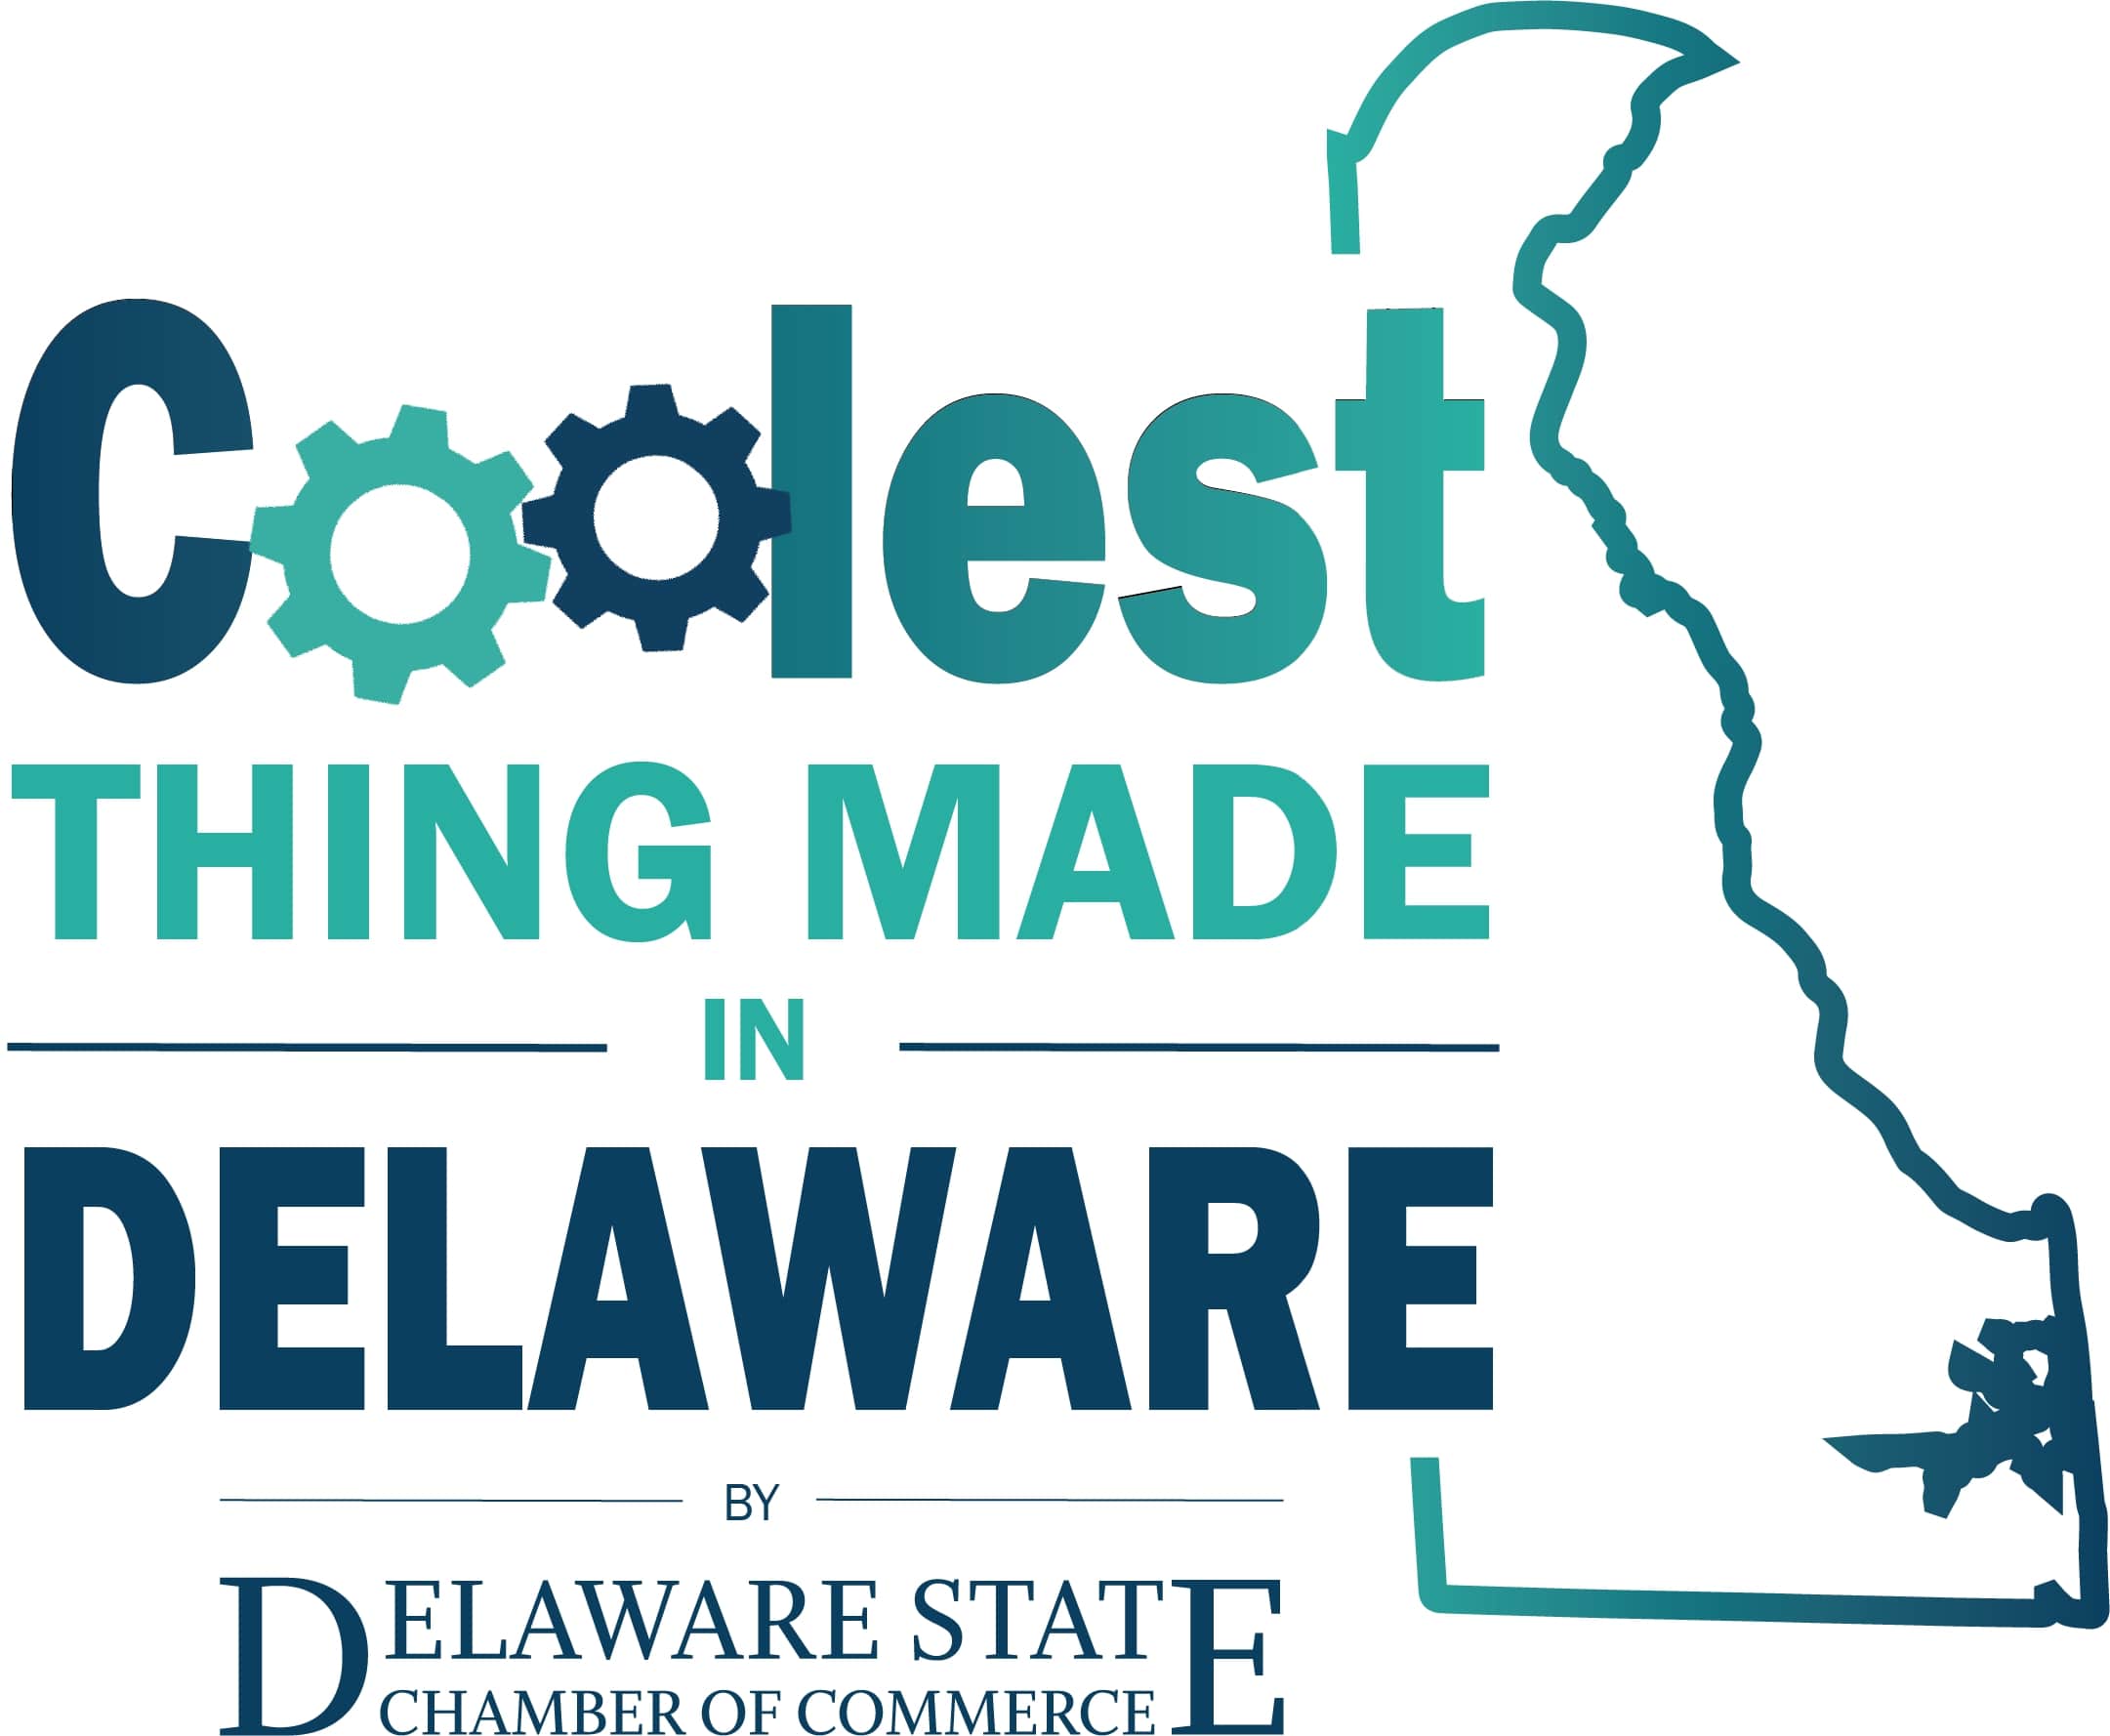 State Chamber’s ‘coolest thing made’ contest shines light on manufacturing